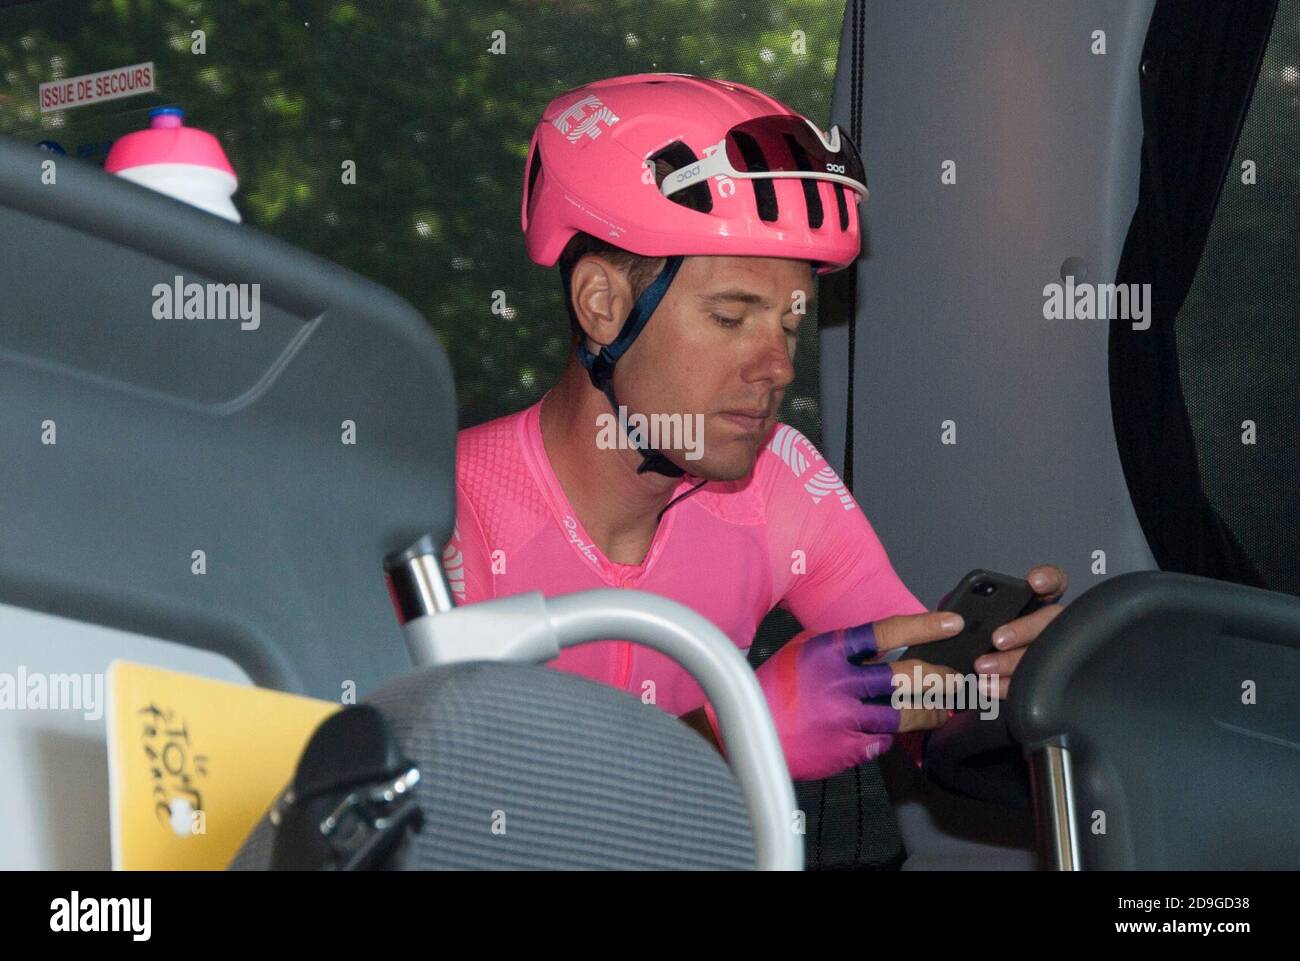 Sebastian Langeveld on the team bus. Riders were taking part in the Wirral Stage (Stage 5) of the 2019 Tour of Britain. The overall General Classification was won by Mathieu van der Poel. Stock Photo